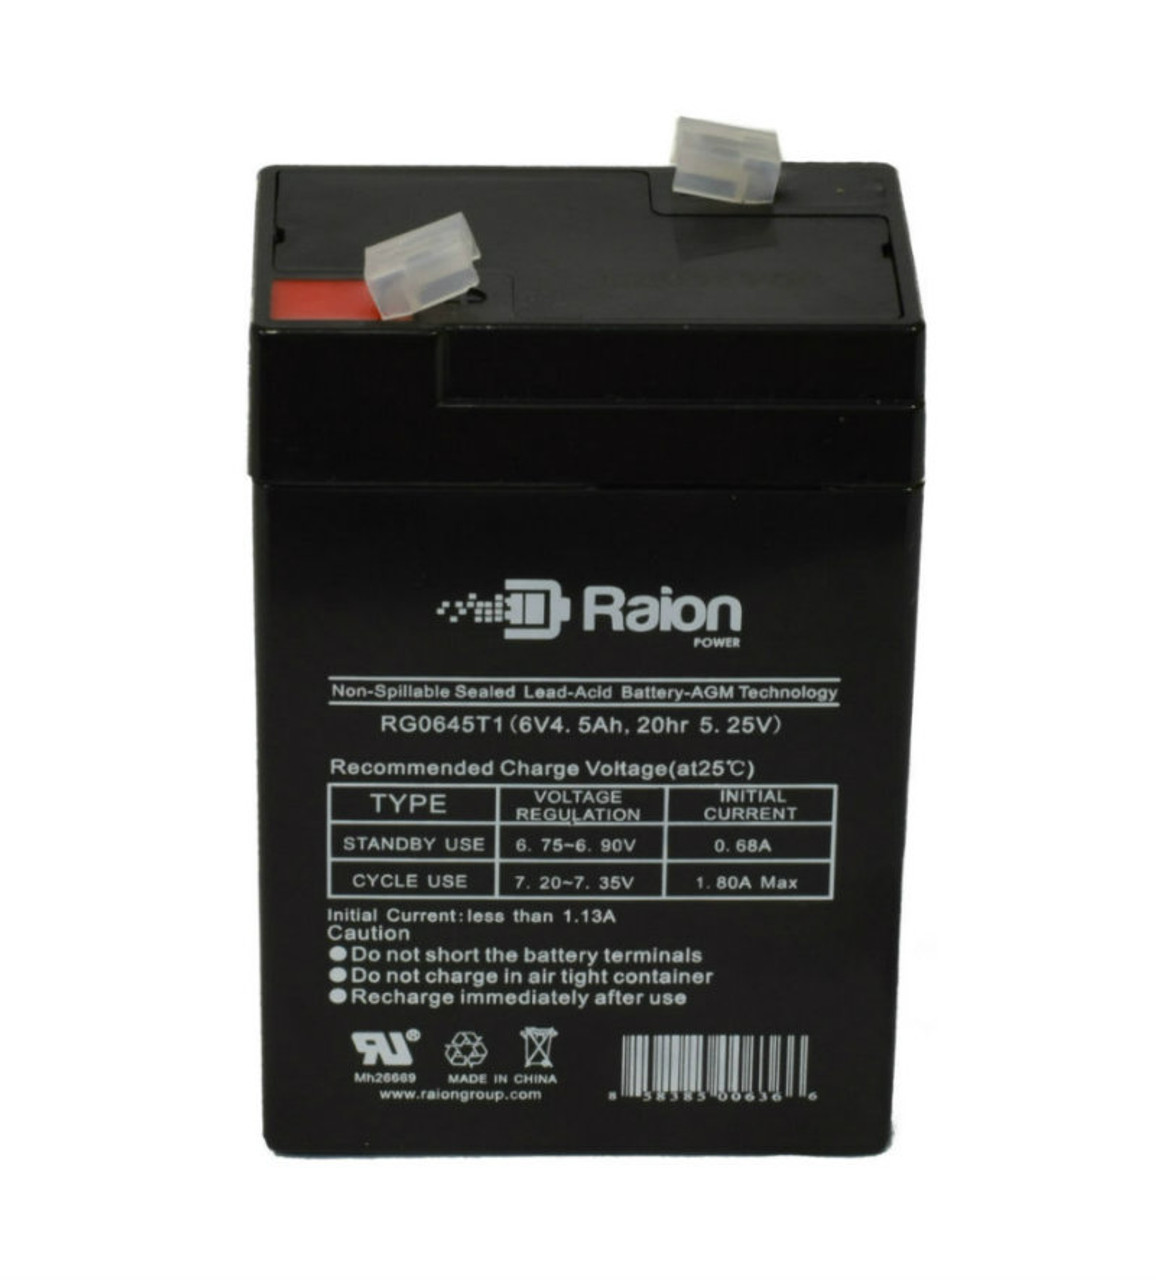 Raion Power RG0645T1 Replacement Battery Cartridge for Yuntong YT-645